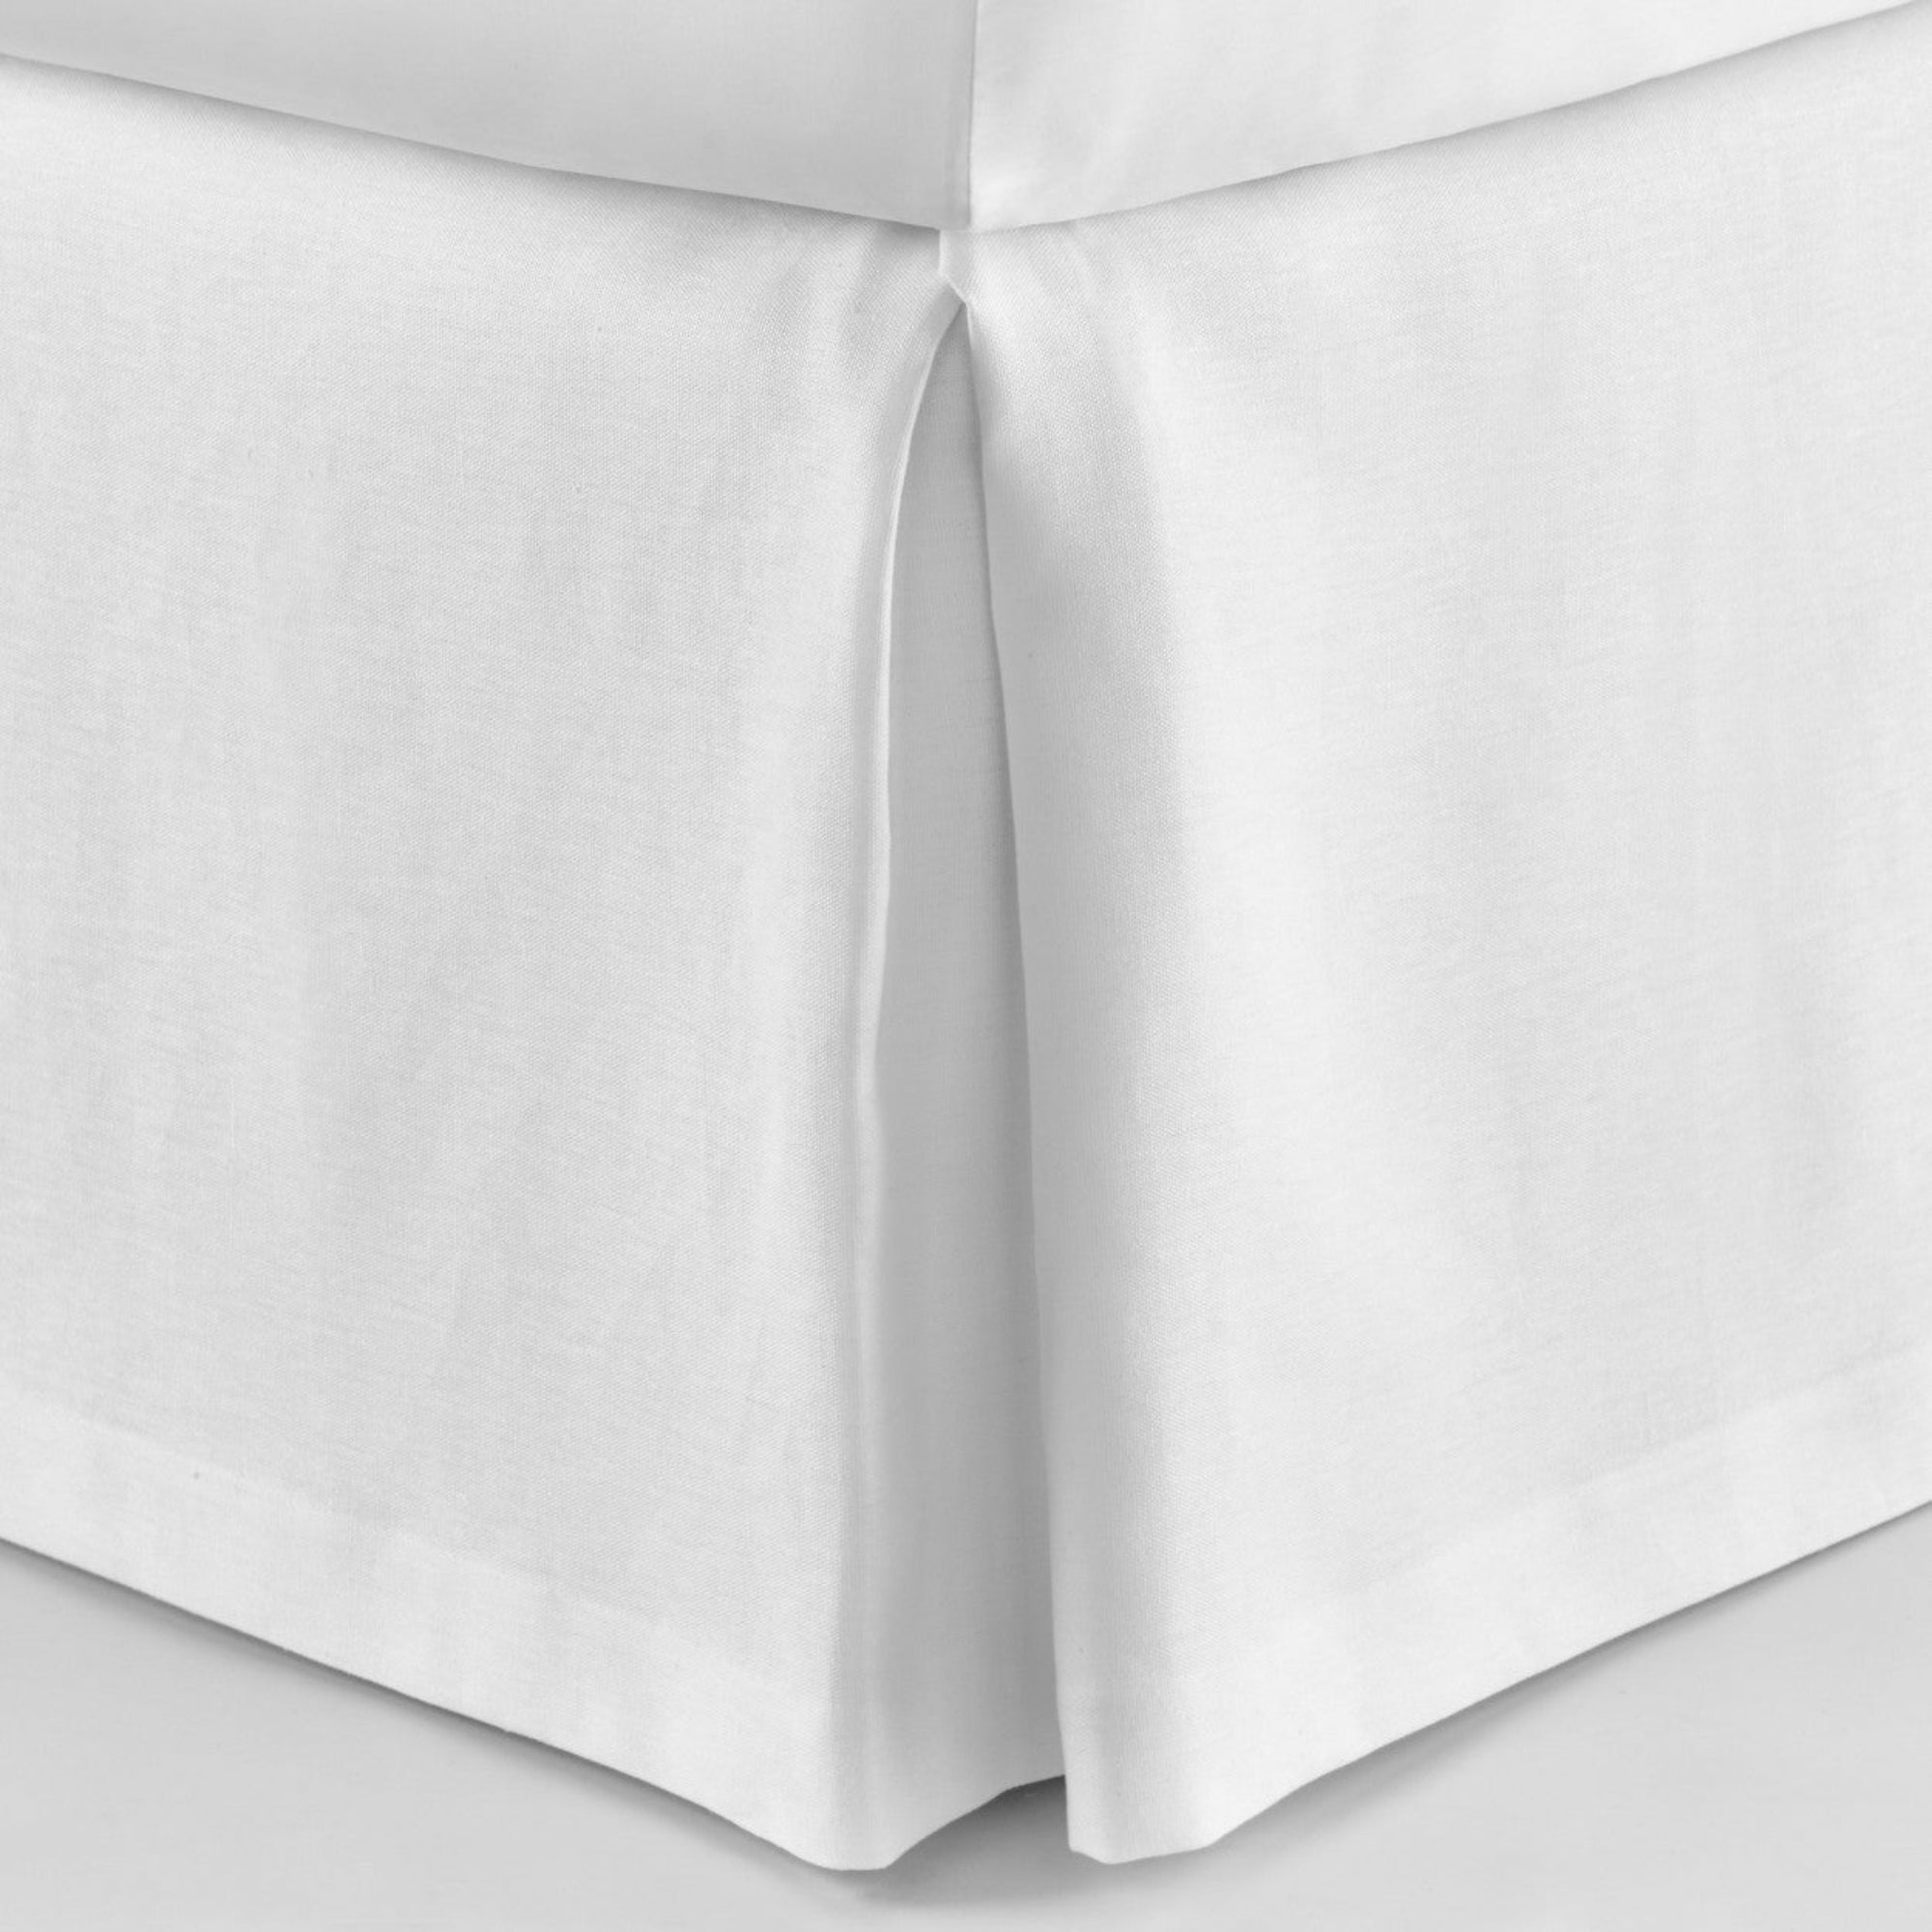 Do You Need a Bed Skirt? Expert Answers from Fine Linen and Bath